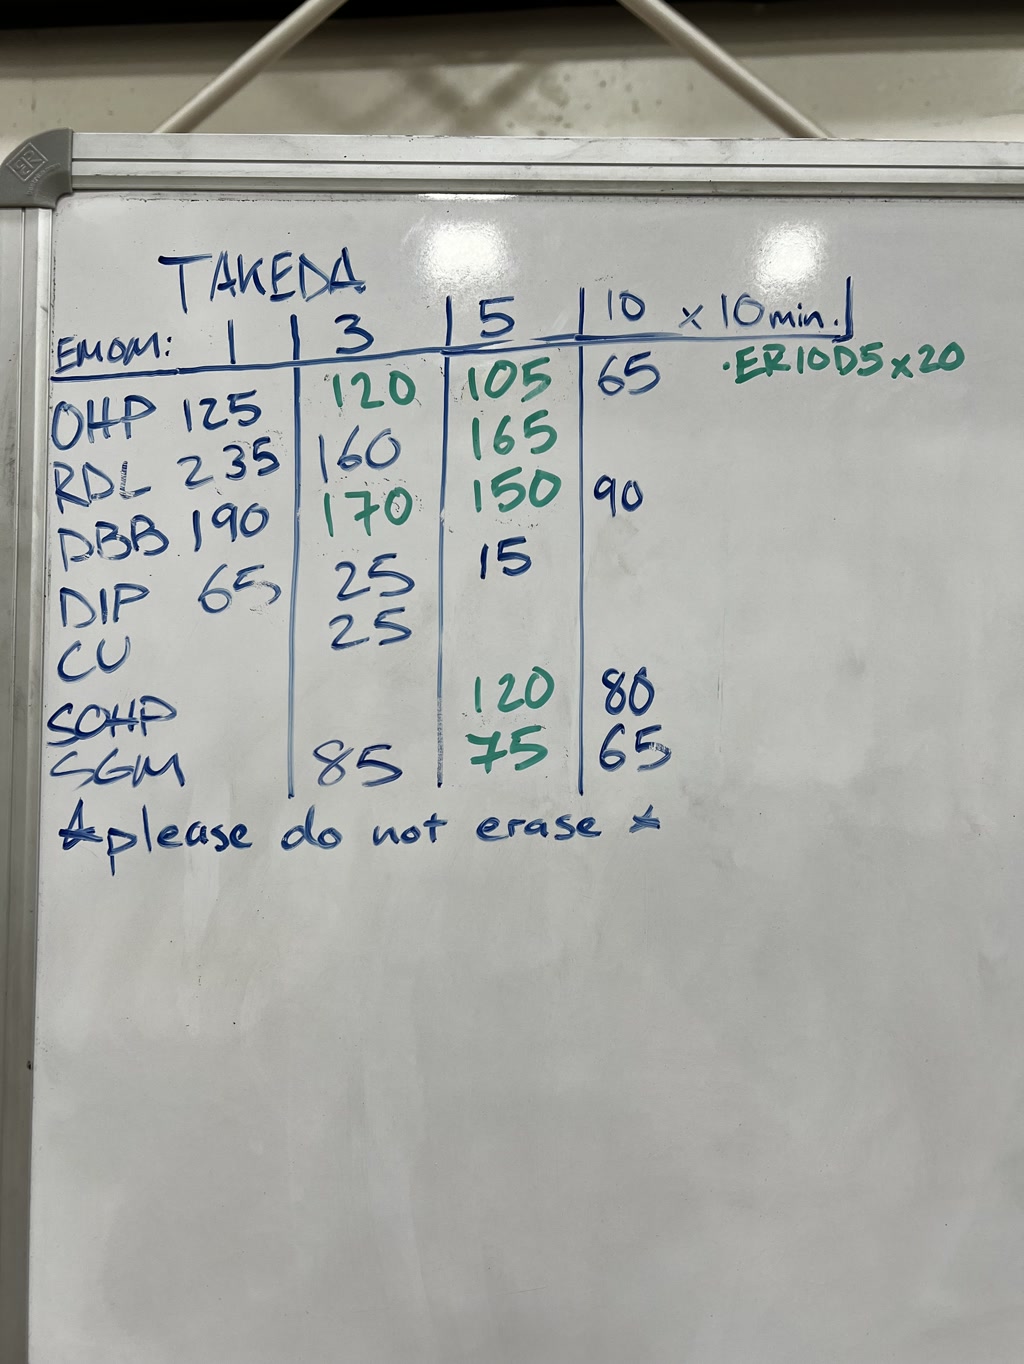 The photo shows a whiteboard with hand-written entries organized in columns and rows, comprising numbers and some abbreviations or codes. At the top, 'TAKEDA' is written prominently. Rows of data correspond to abbreviations such as 'EMOM,' 'OHP,' 'RDL,' 'DBP,' 'DIP,' 'CU,' 'SCHP,' and 'SGM,' with numbers associated with each, varying from 15 to 235. Some numbers are circled and there are annotations like 'x 10 min' and 'EX 10 DS x 20' next to certain entries. Below the data, it reads 'please do not erase' with two arrows pointing downward on either side of the text.